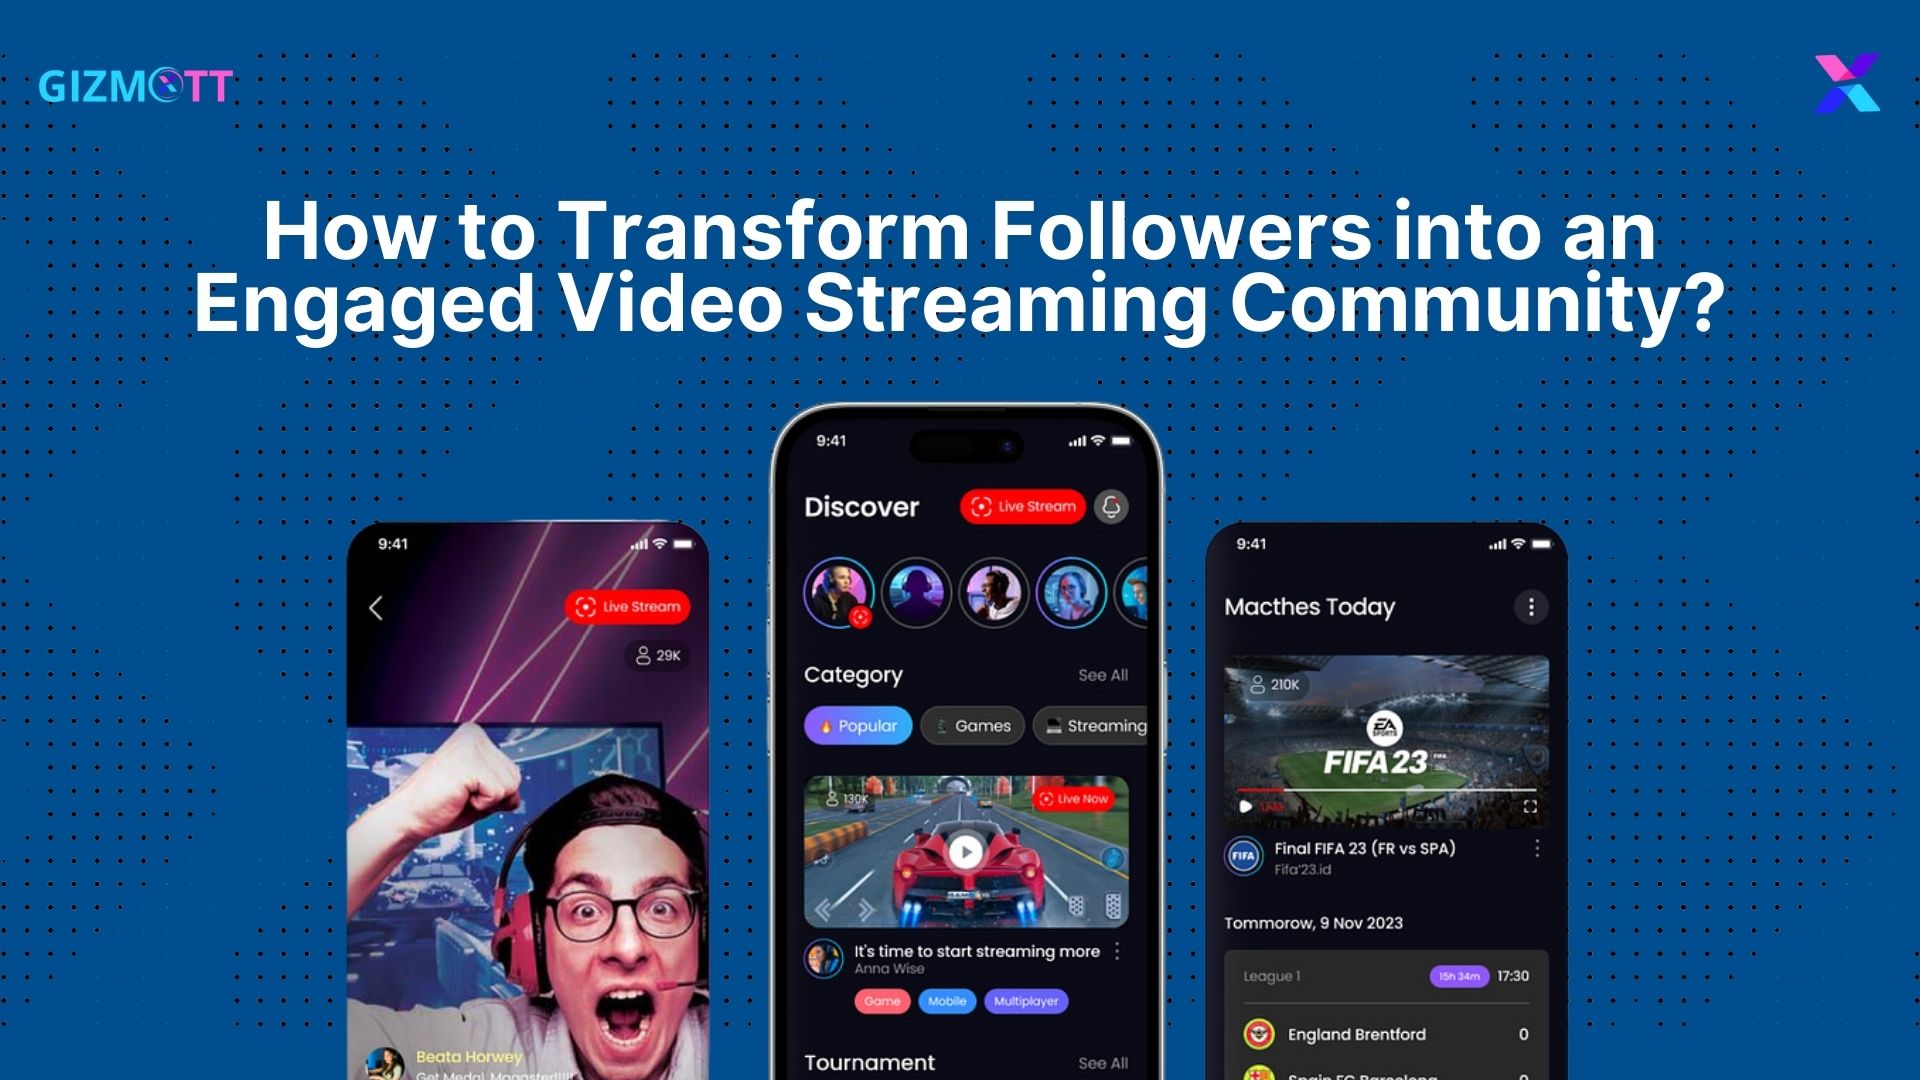 How to Transform Followers into an Engaged Video Streaming Community?